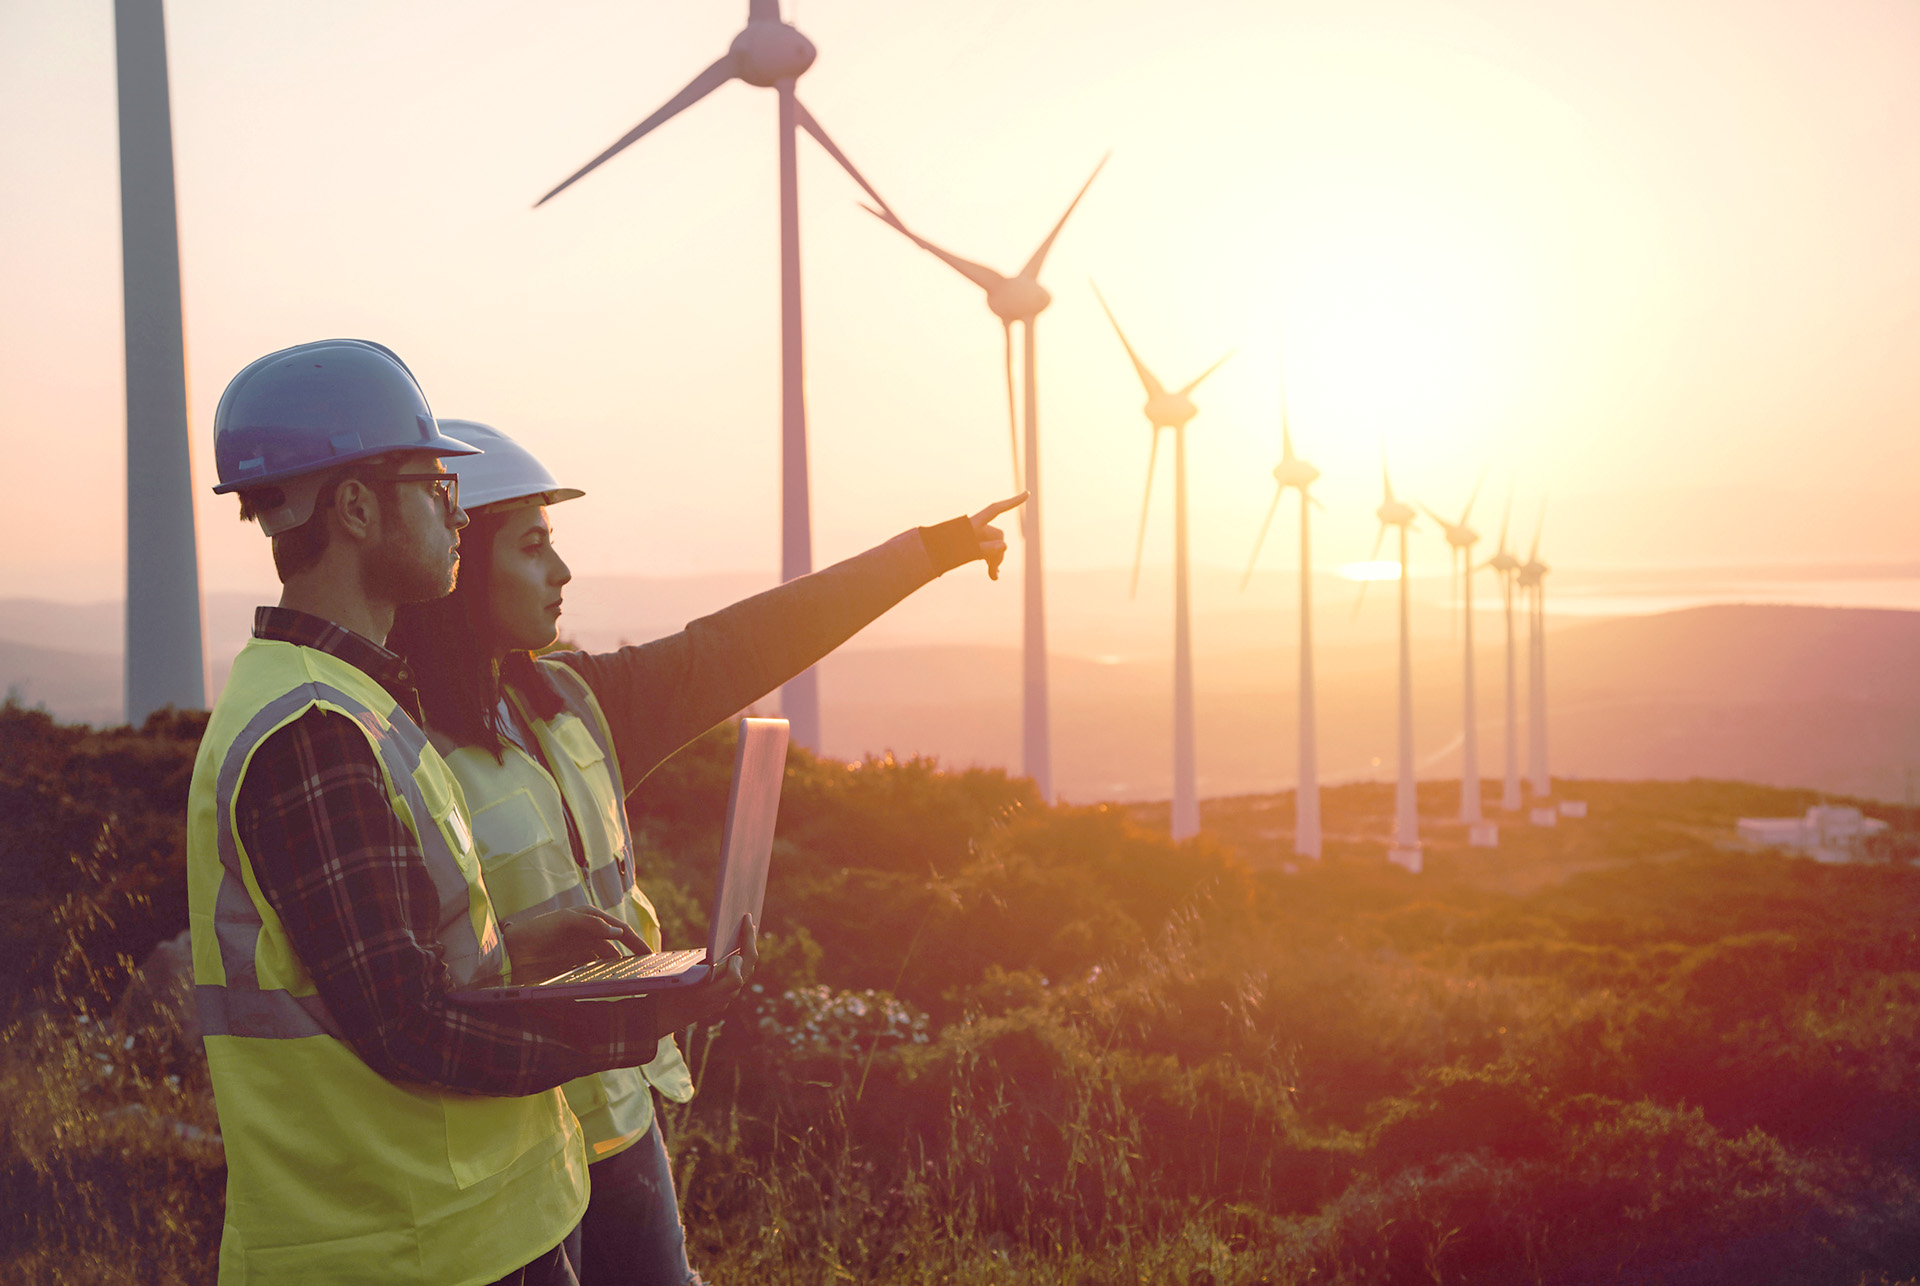 With more than 30 years of experience in the energy sector, we provide digital transformation and data solutions for oil, gas, power, and utilities companies around the globe.